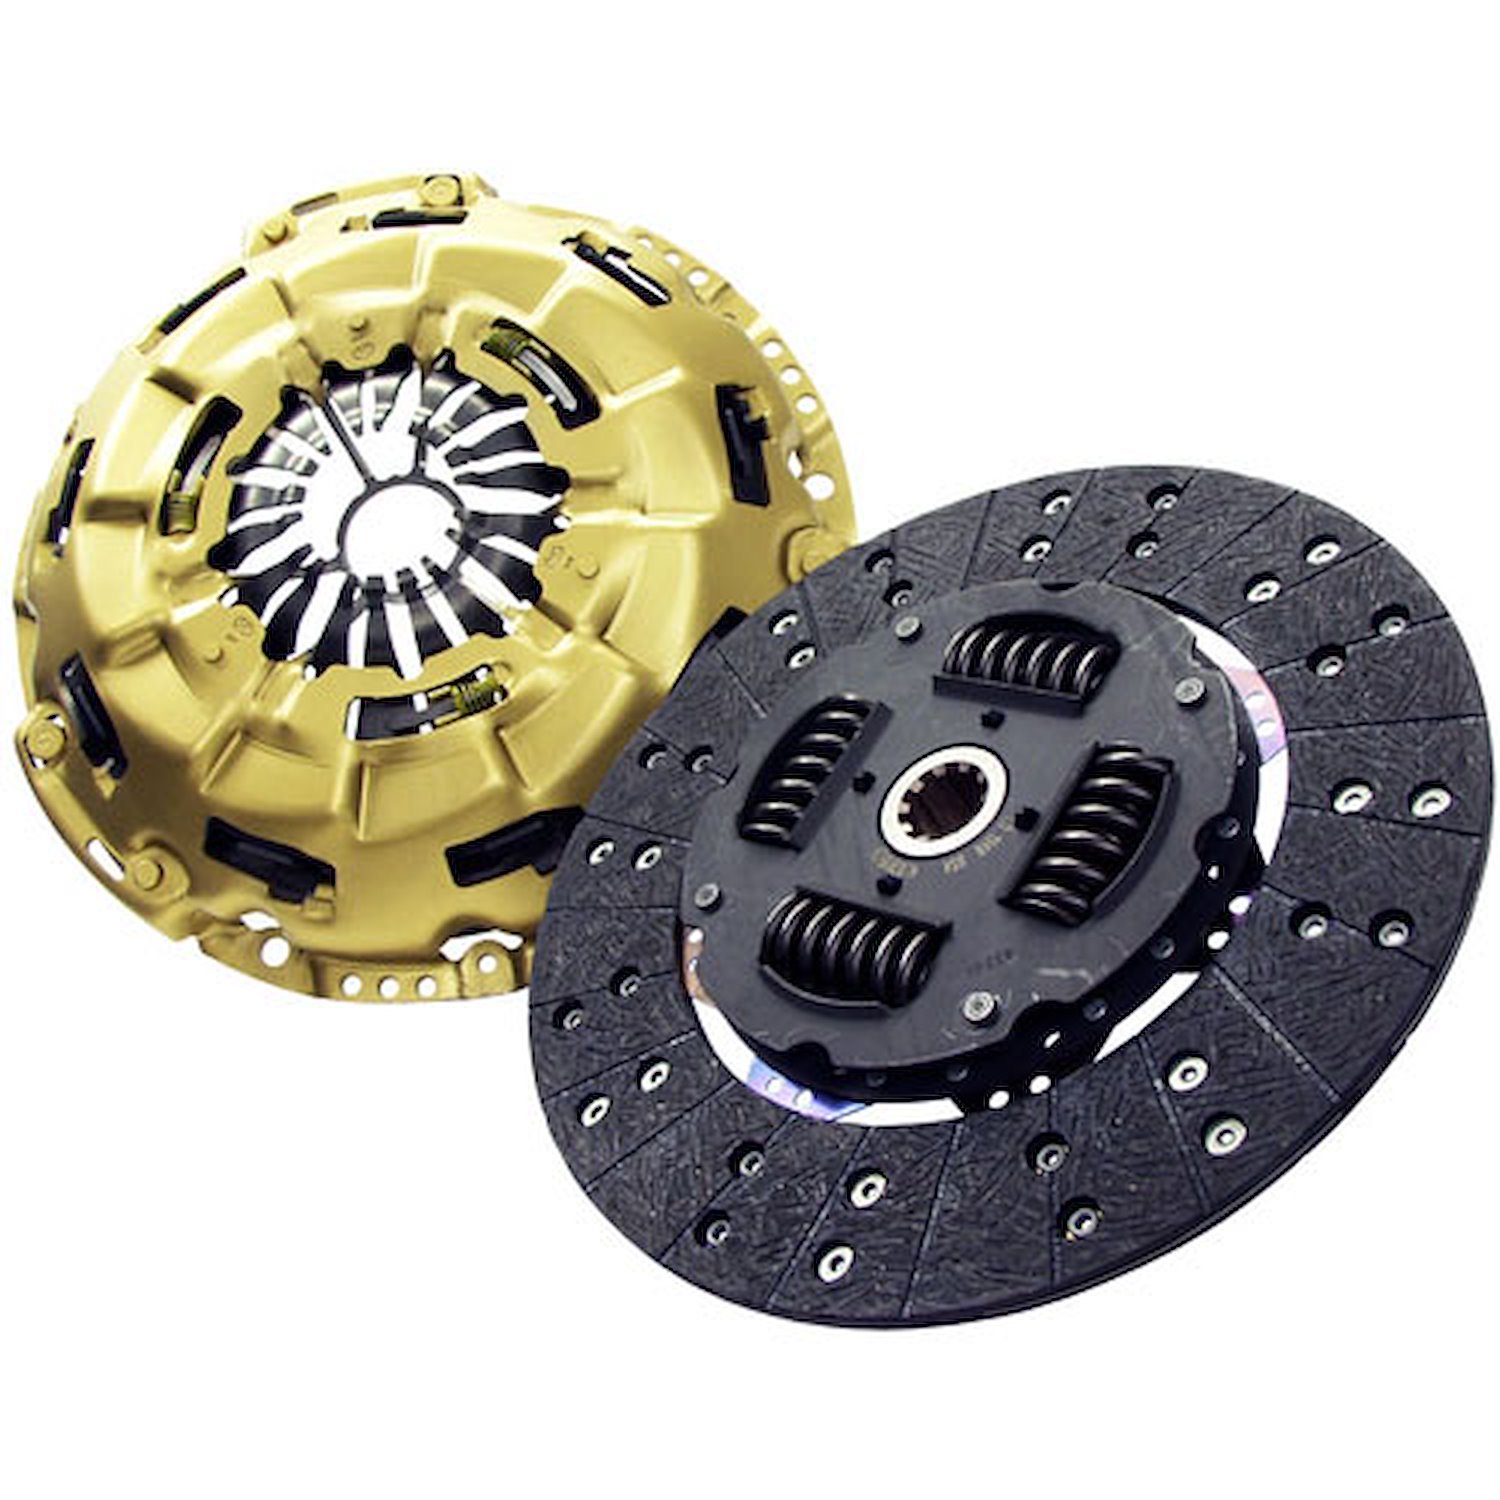 Centerforce I Clutch Kit Includes Pressure Plate And Disc